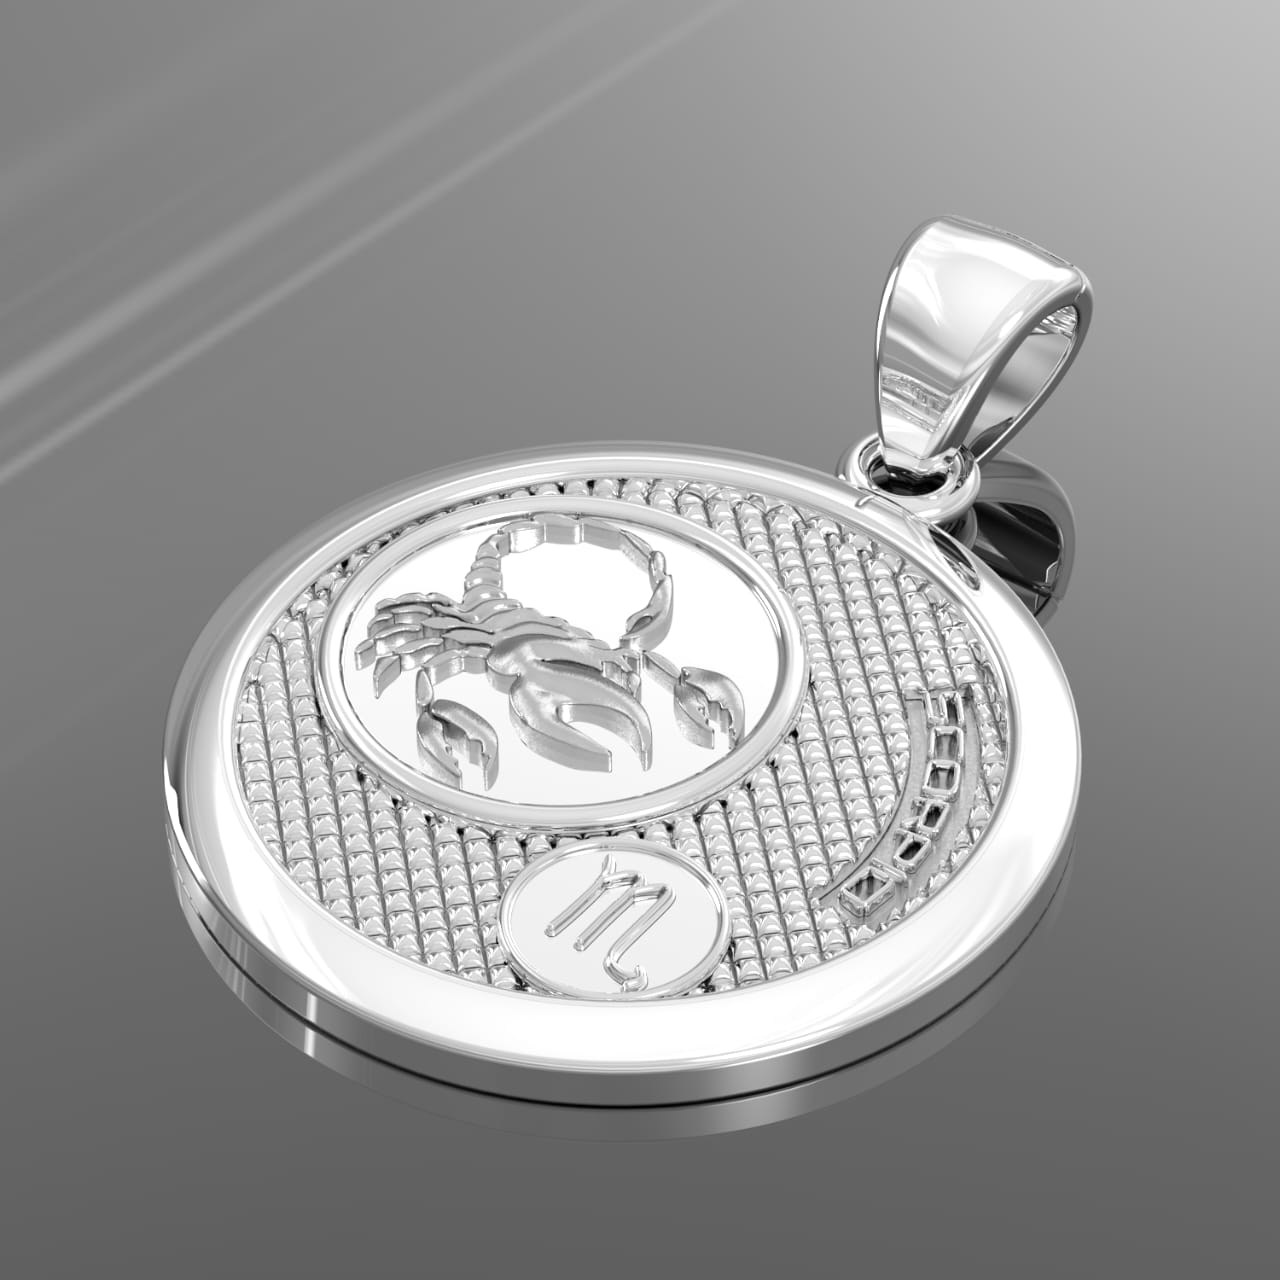 Ladies 925 Sterling Silver Round Scorpio Zodiac Polished Finish Pendant Necklace, 25mm